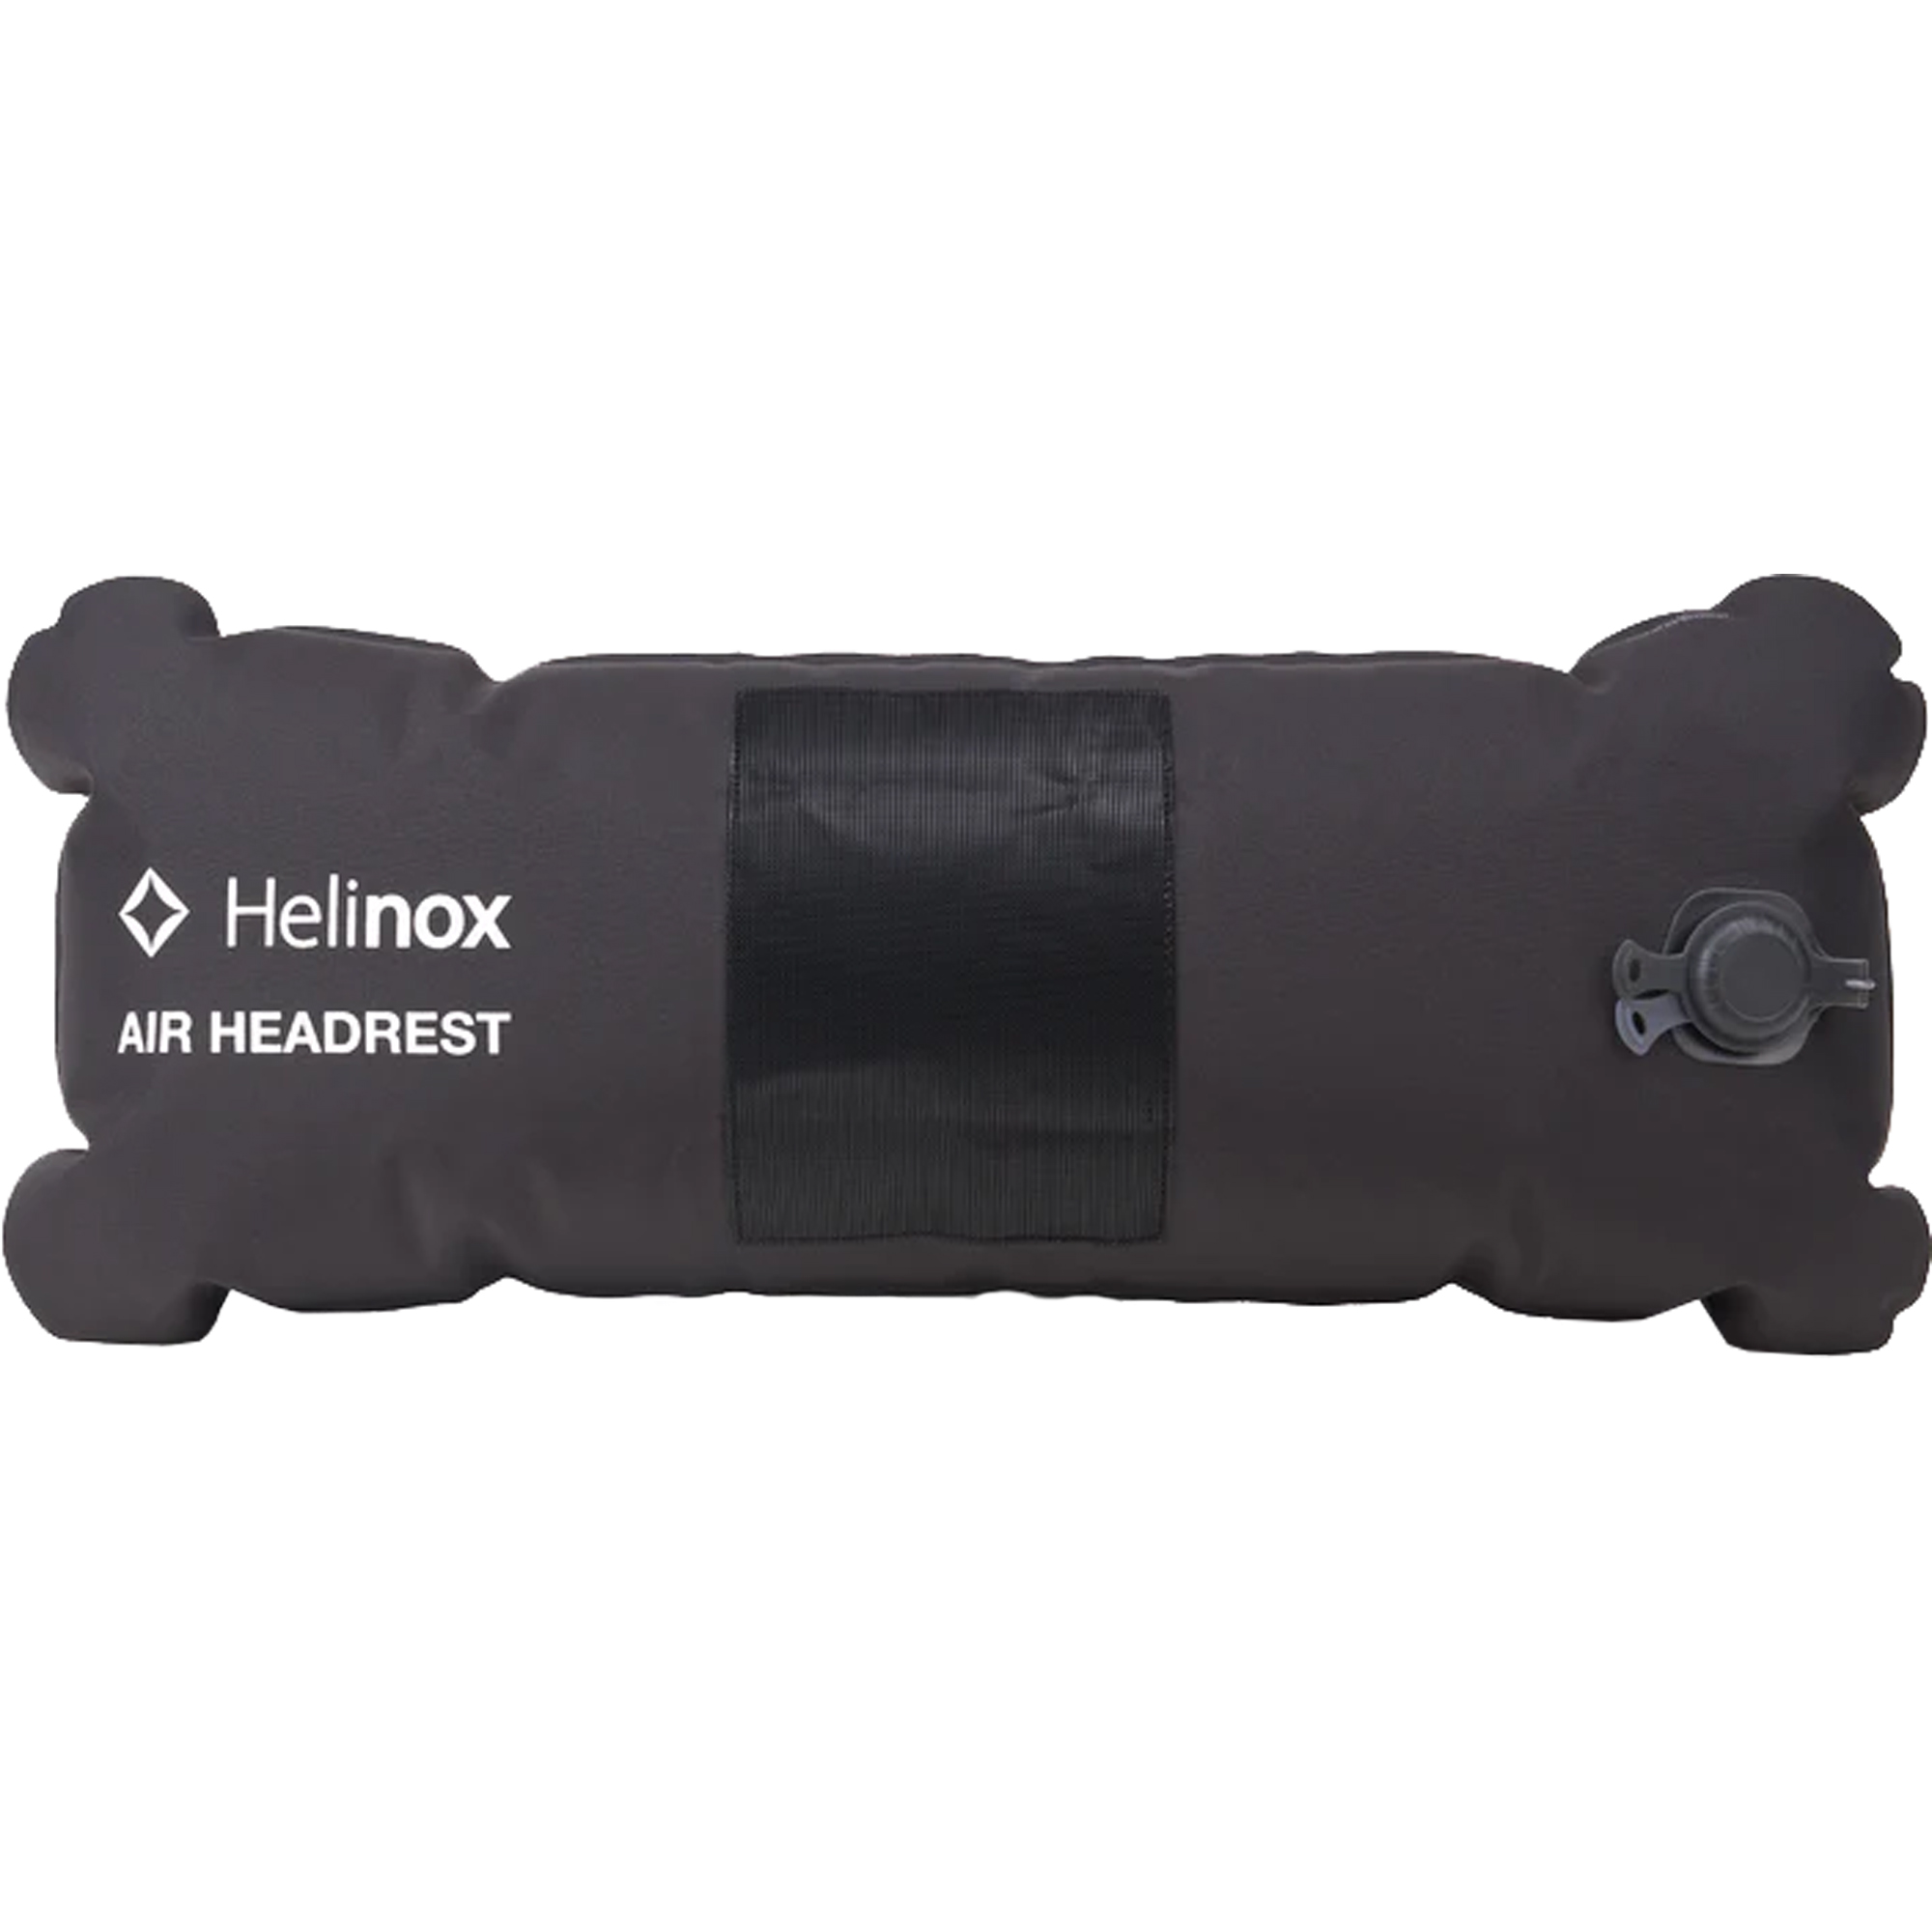 Photos - Outdoor Furniture Helinox Air Headrest Camping Chair Accessory, Black 12776R1 